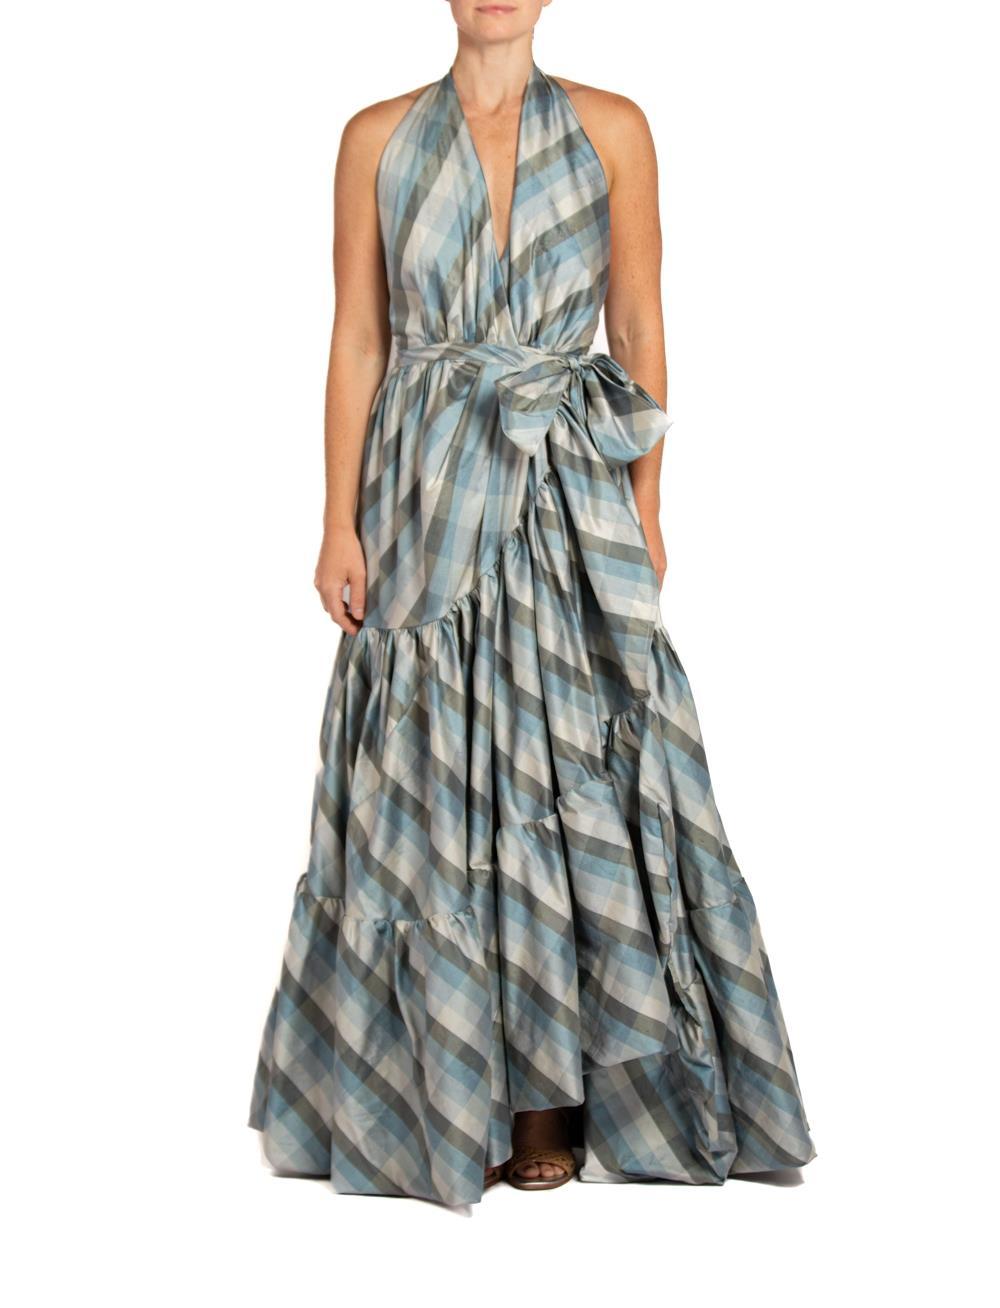 MORPHEW COLLECTION Blue & Gray Silk Taffeta Plaid Gown
MORPHEW COLLECTION is made entirely by hand in our NYC Ateliér of rare antique materials sourced from around the globe. Our sustainable vintage materials represent over a century of design, many